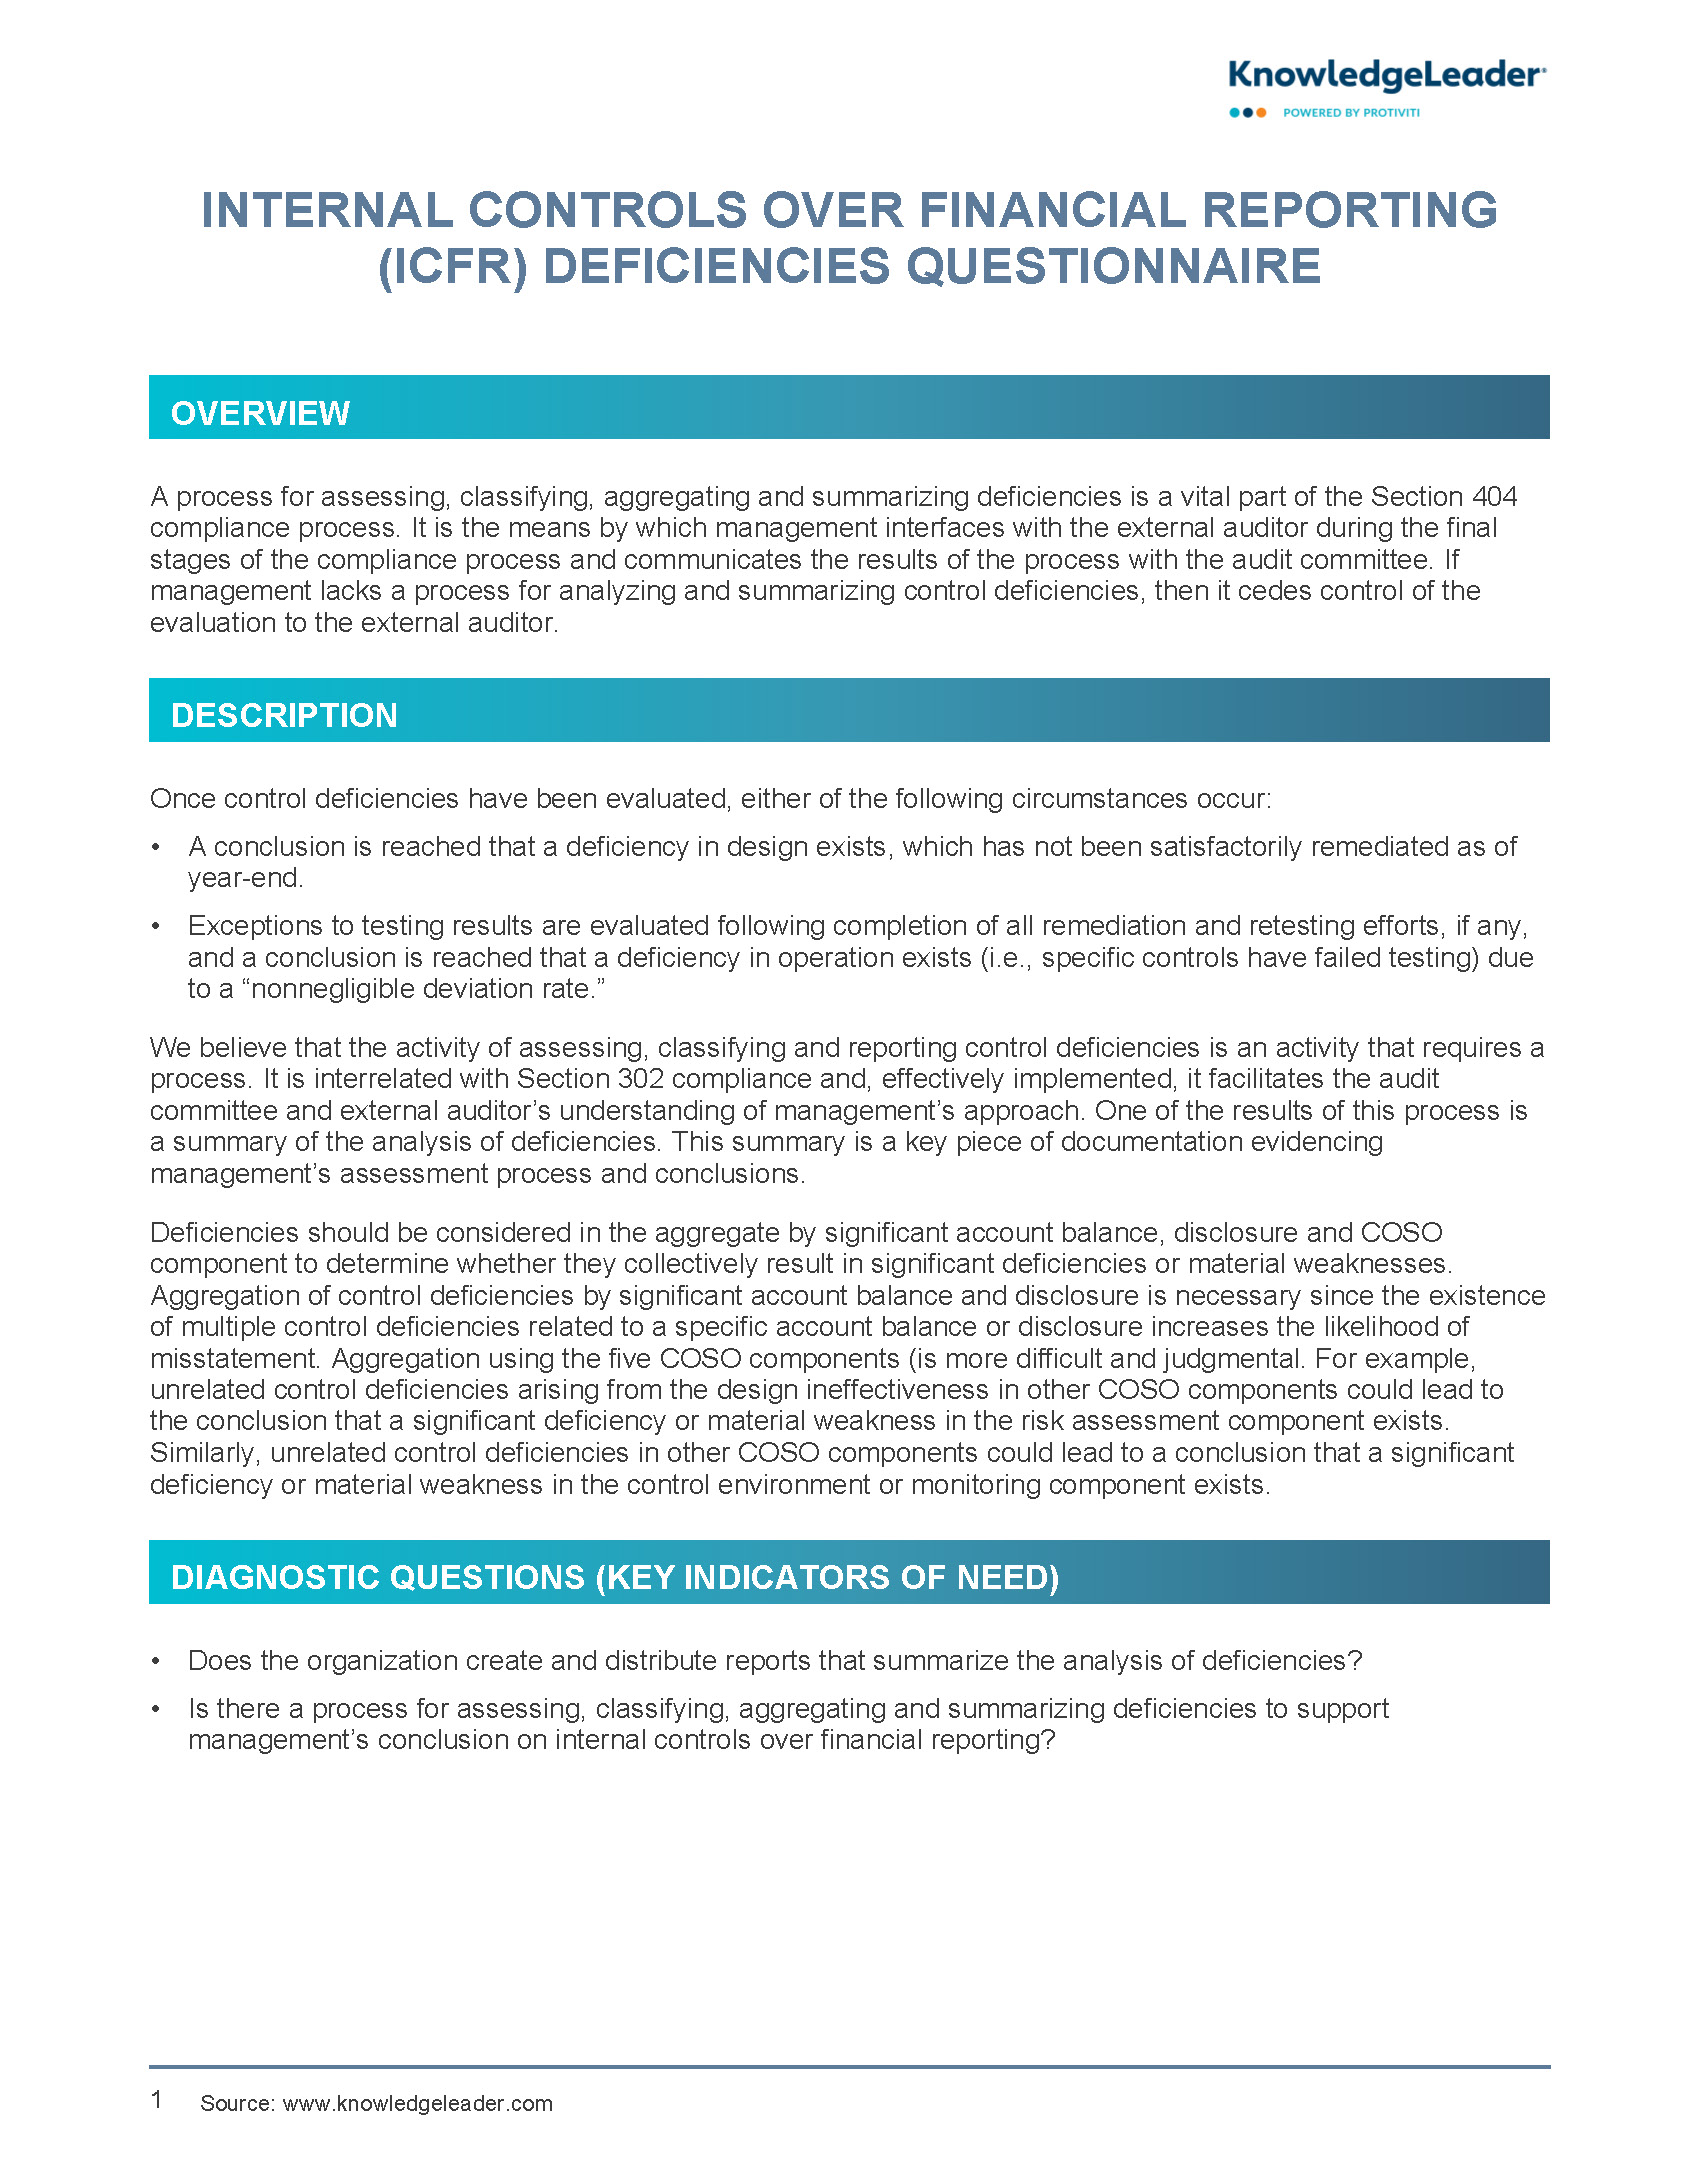 Internal Controls Over Financial Reporting (ICFR) Deficiencies Questionnaire.jpg